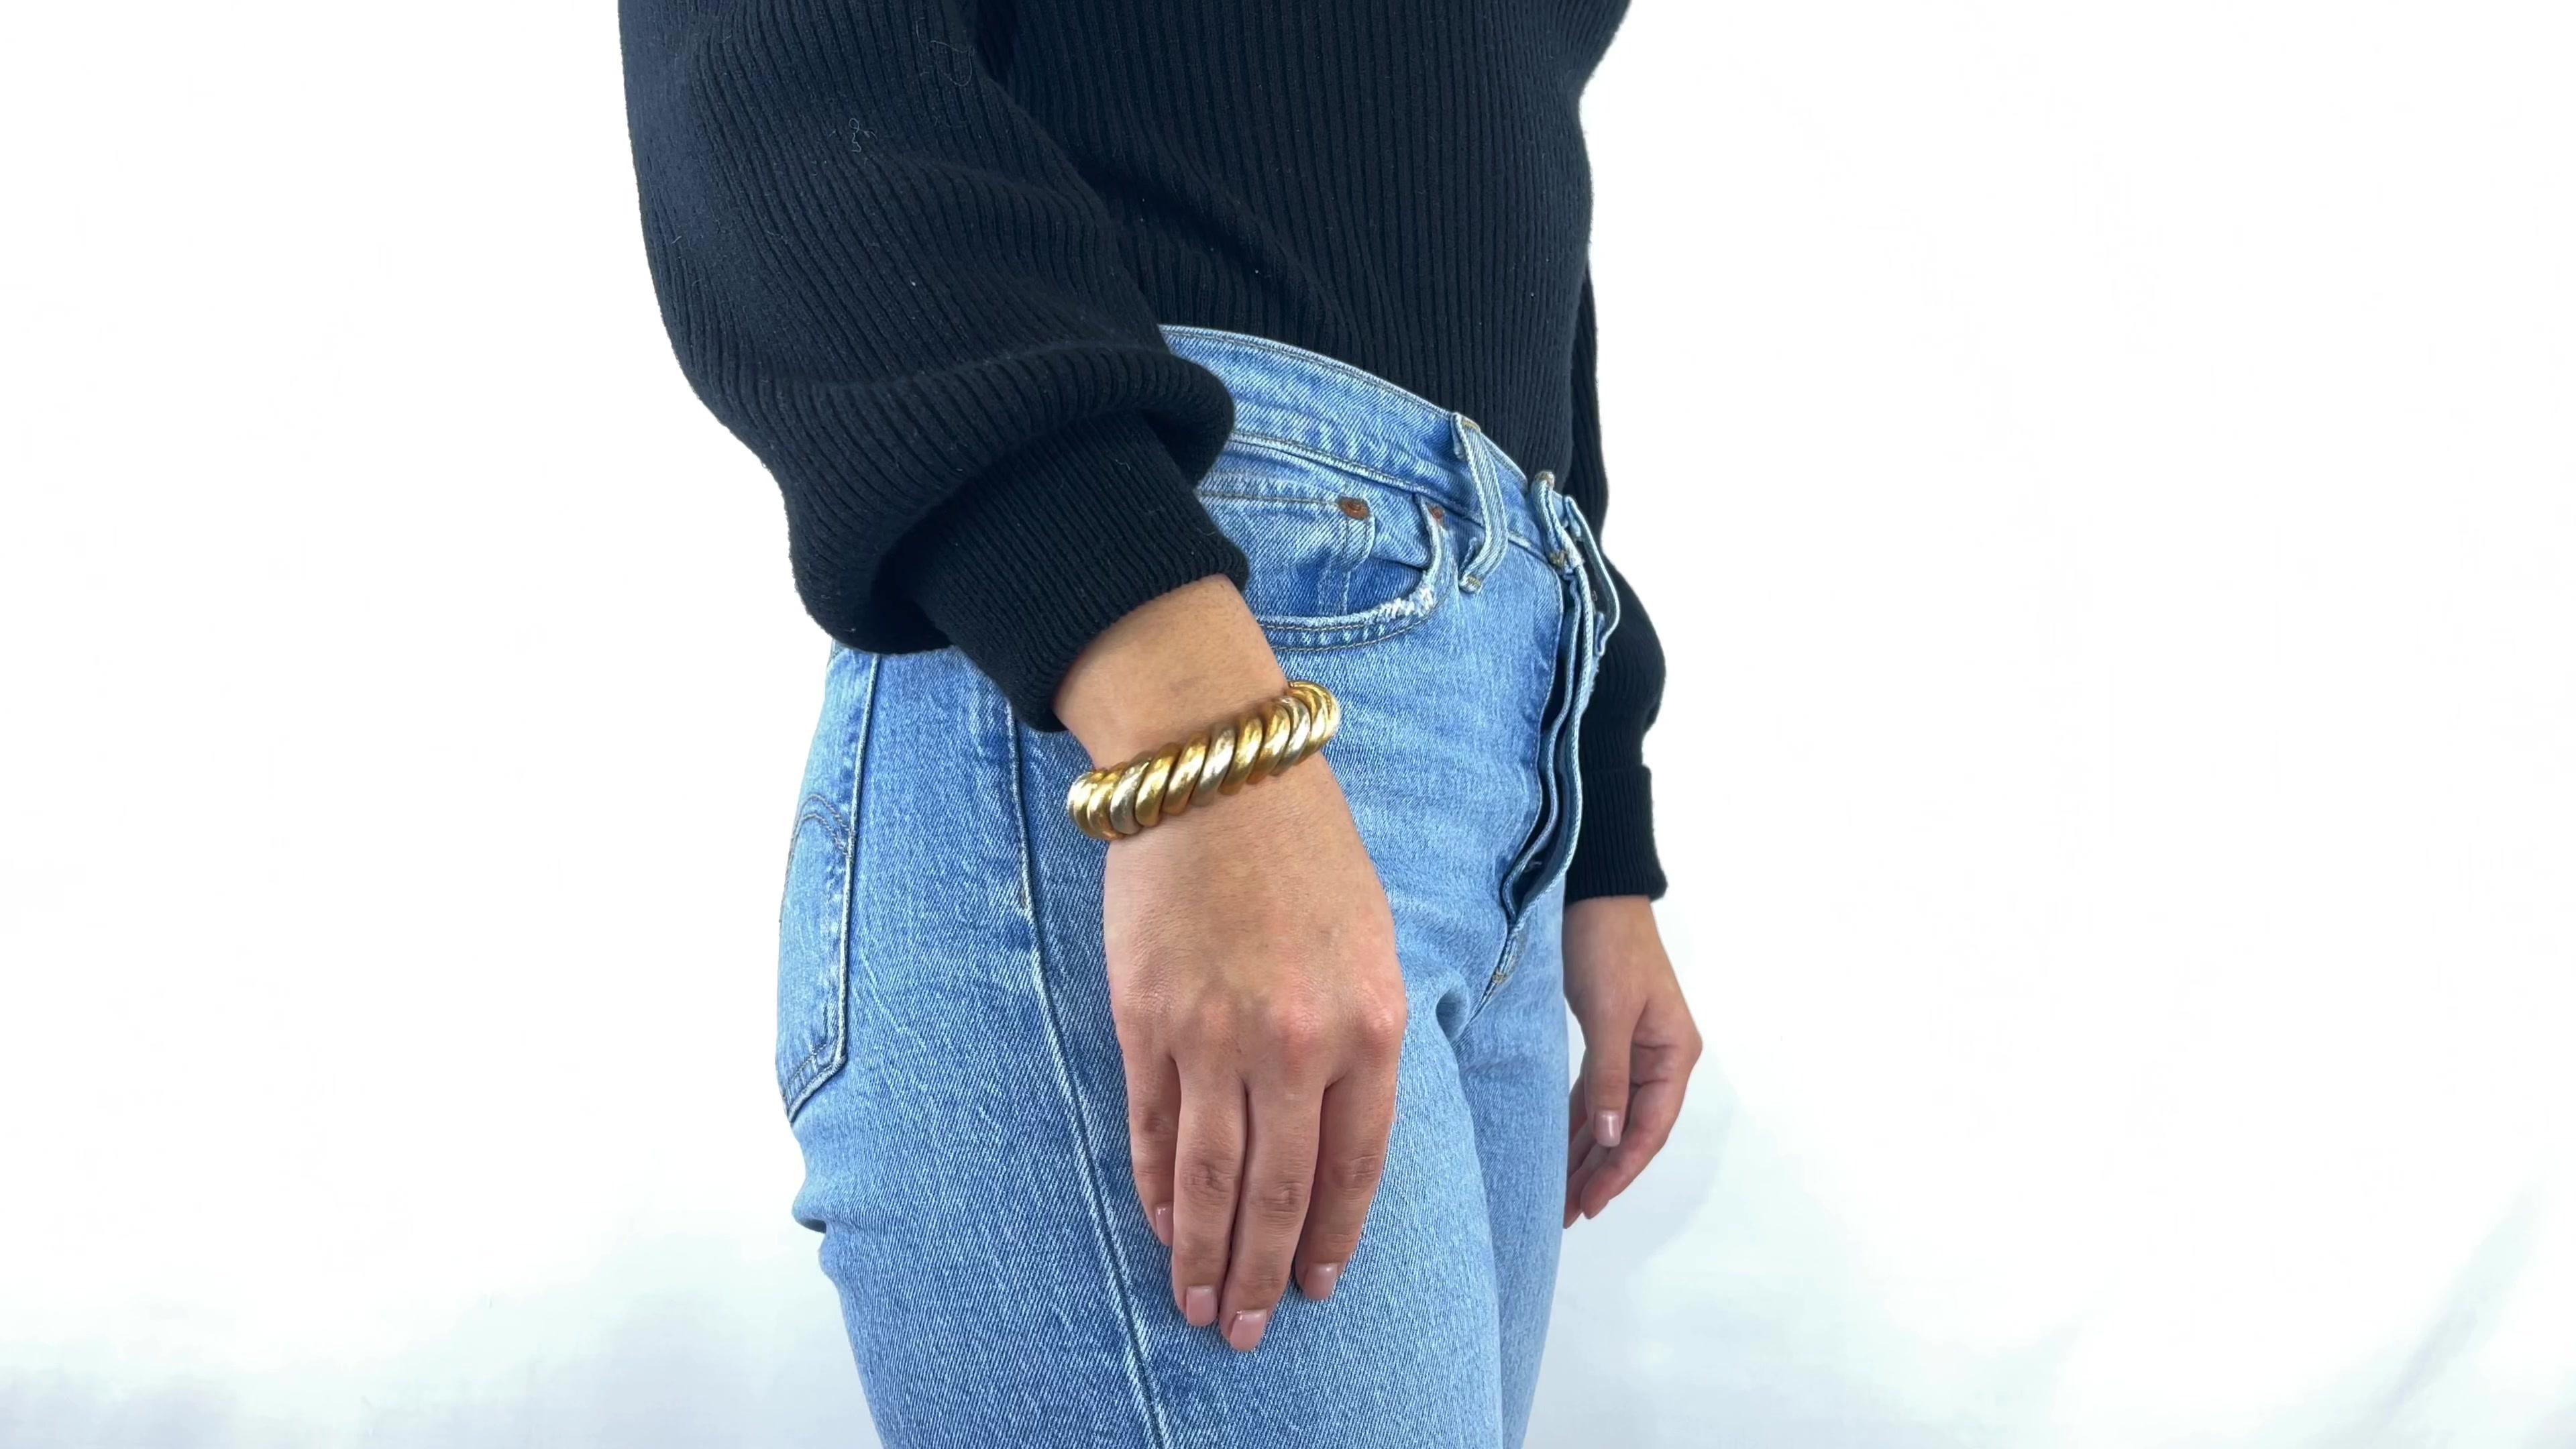 One Retro Italian 18k Gold Tricolor Bracelet. Crafted in 18 karat white, yellow, and rose gold. Circa 1950s. The bracelet measures 7 3/4 inches and best fits a wrist measuring 6 - 7 1/2 inches.

About The Piece: If you are someone who expresses